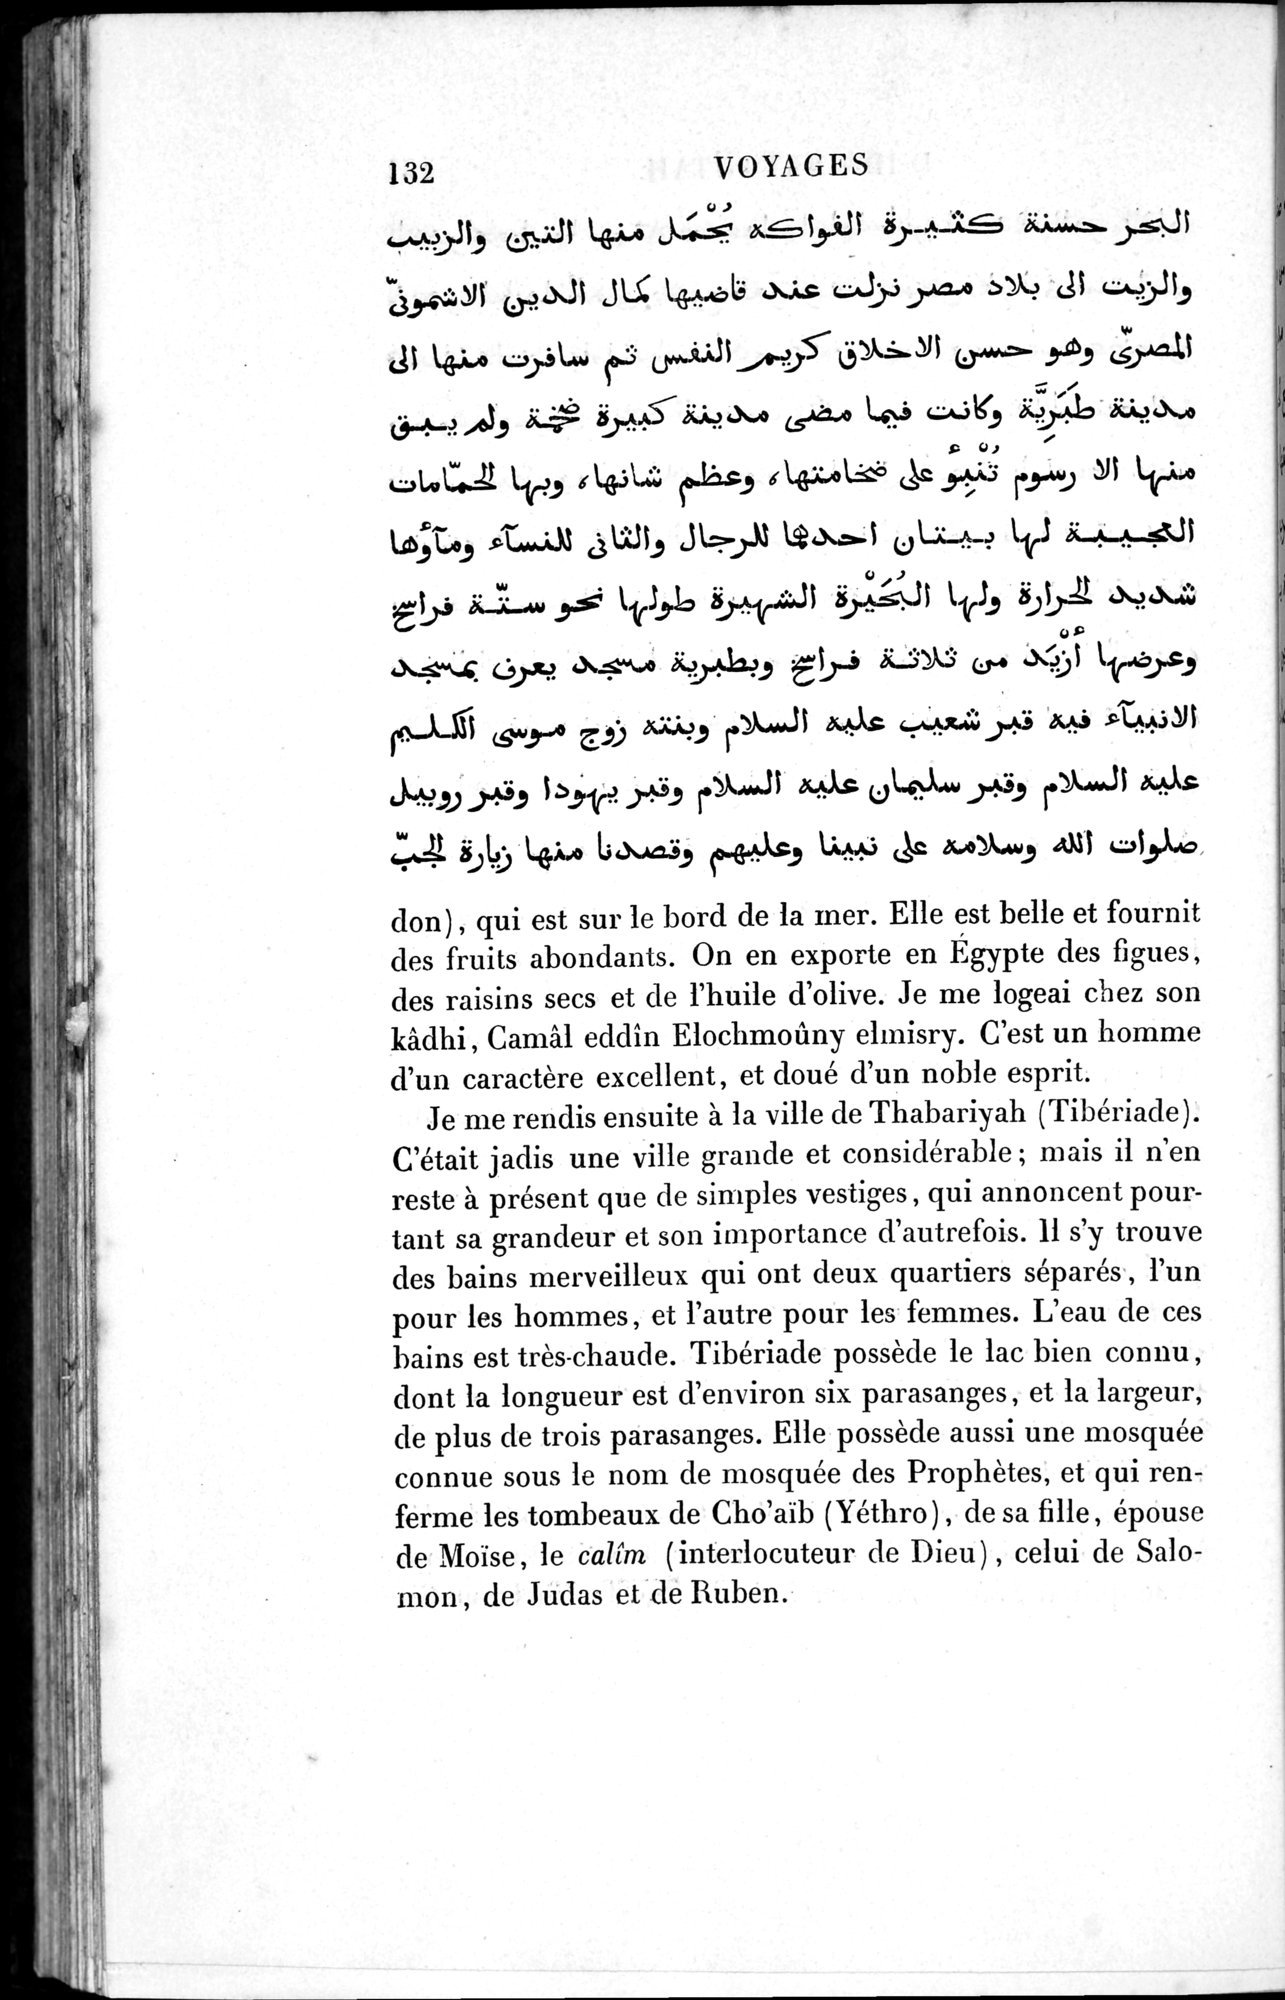 Voyages d'Ibn Batoutah : vol.1 / Page 192 (Grayscale High Resolution Image)